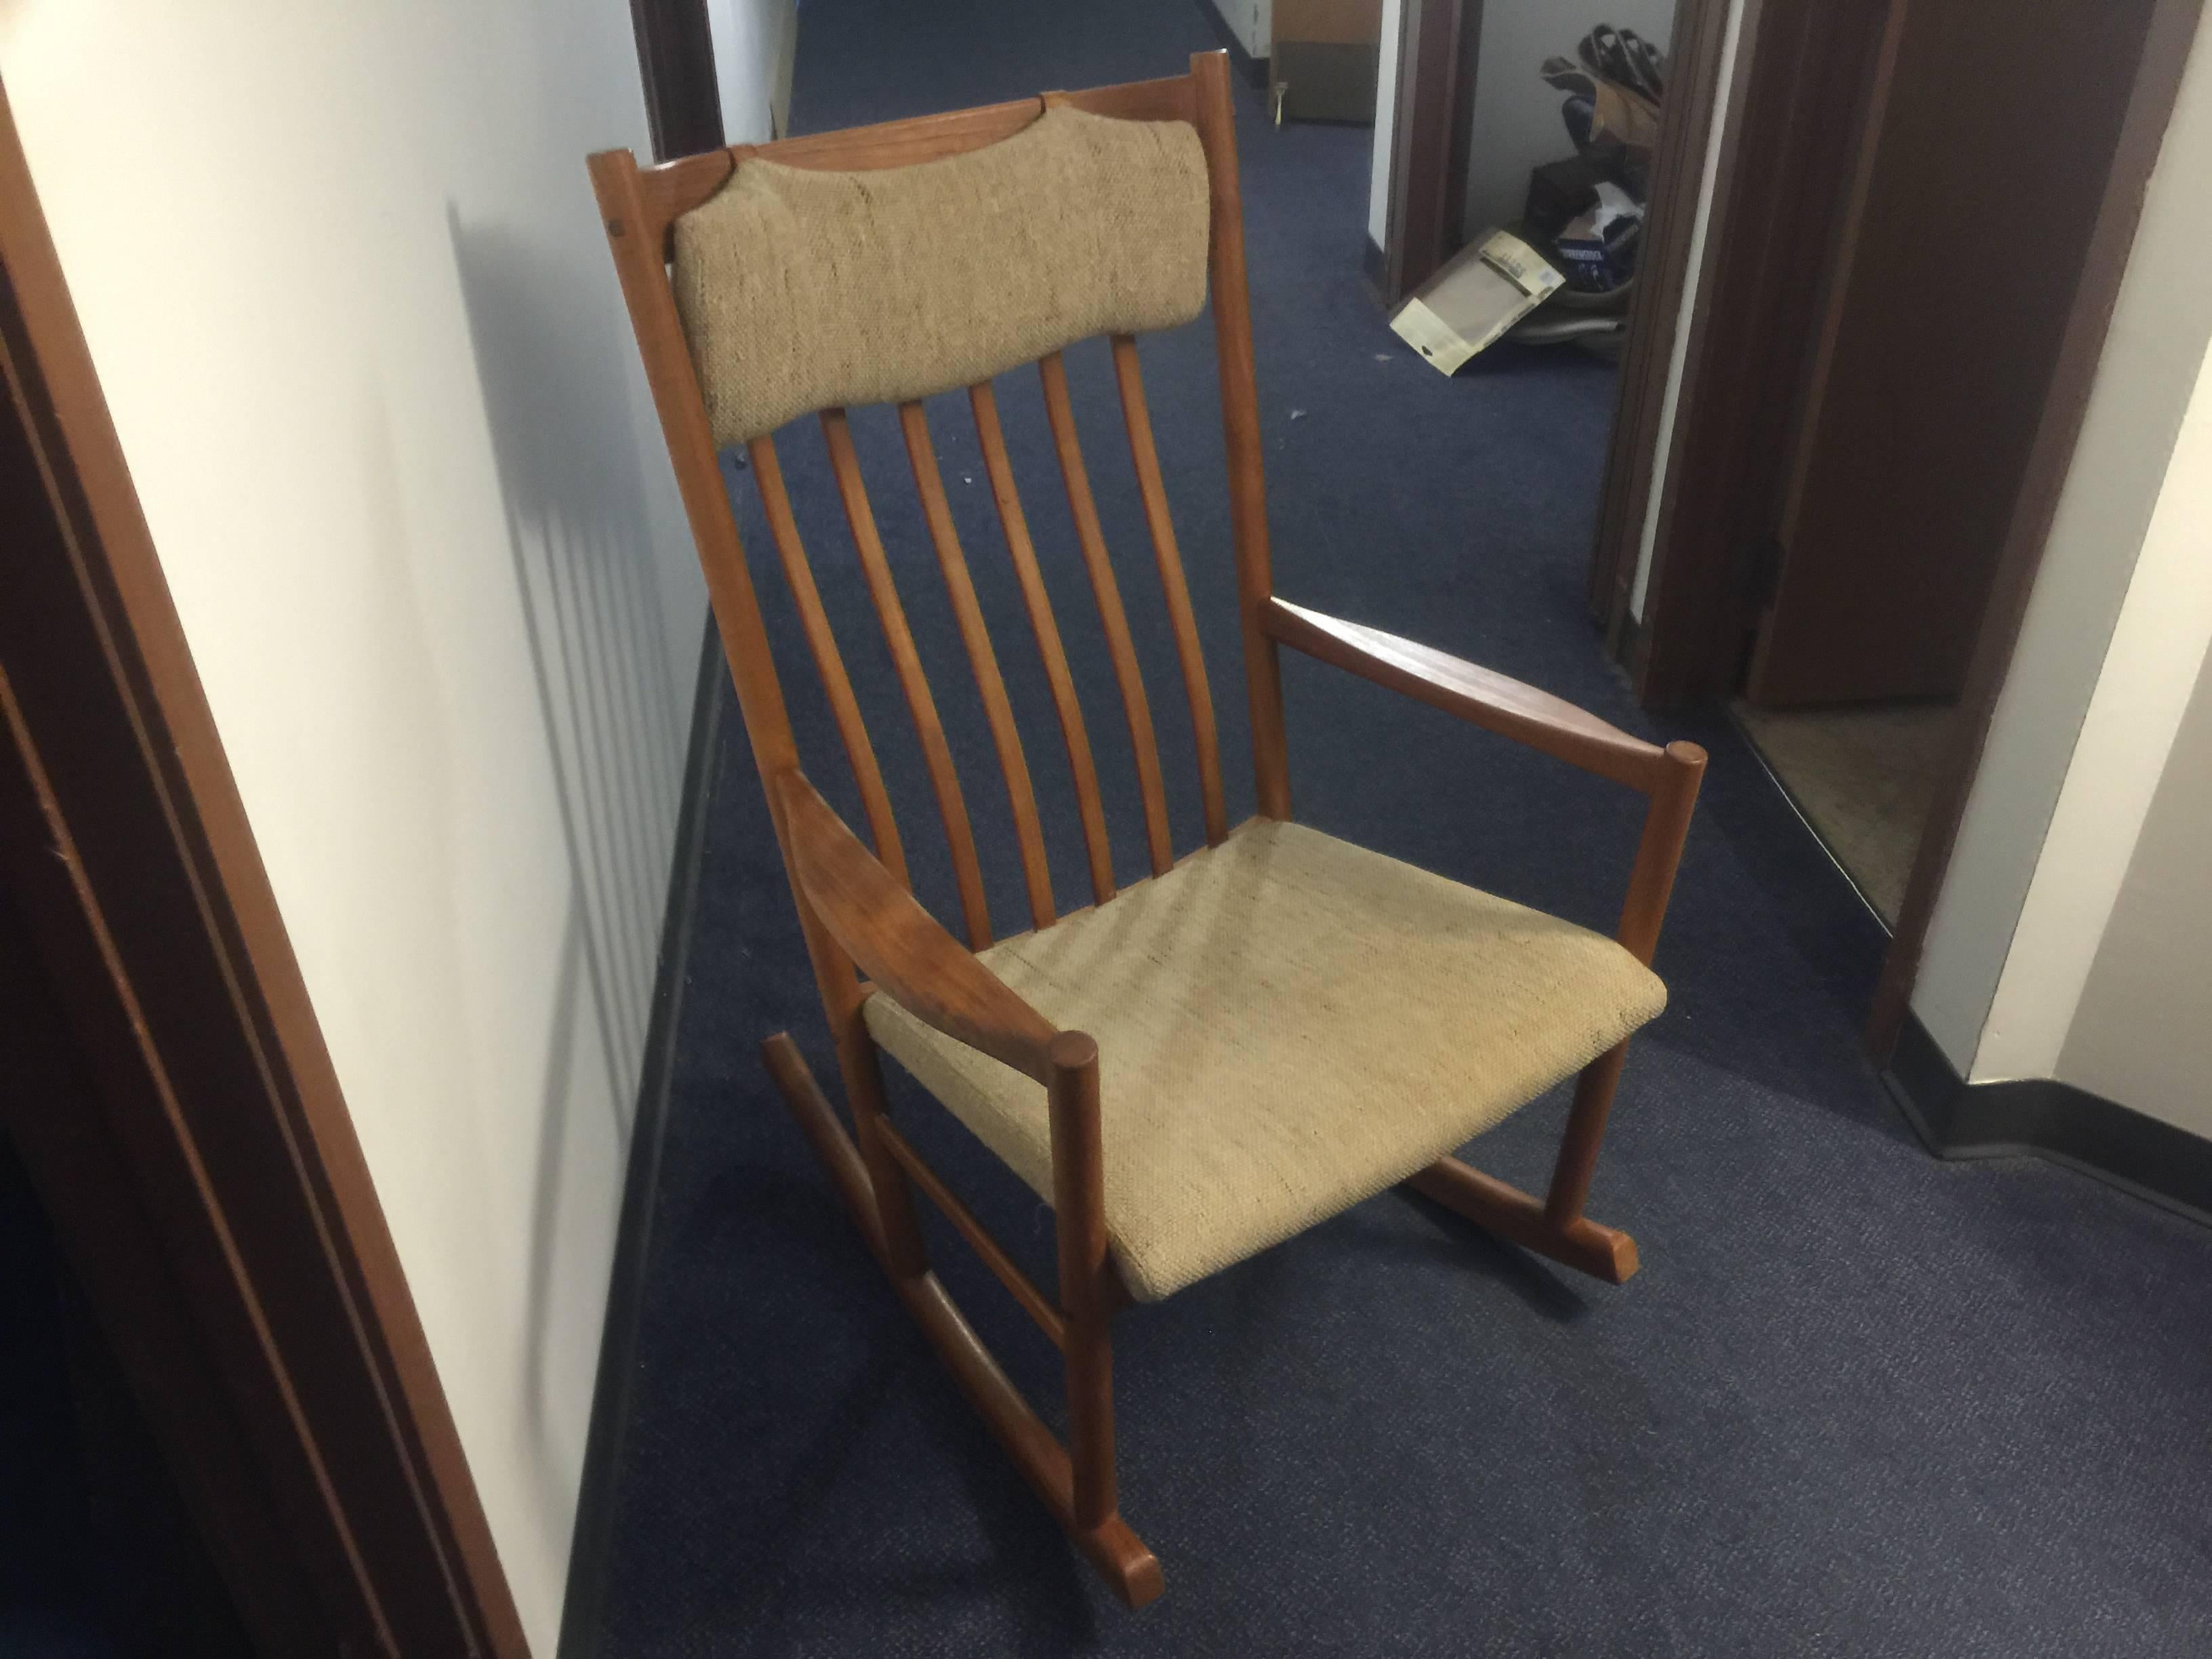 Great teak rocker in good vintage condition.
Could use updated upholstery.
Foam is good.
And teak frame is excellent just minor wear consistent with age